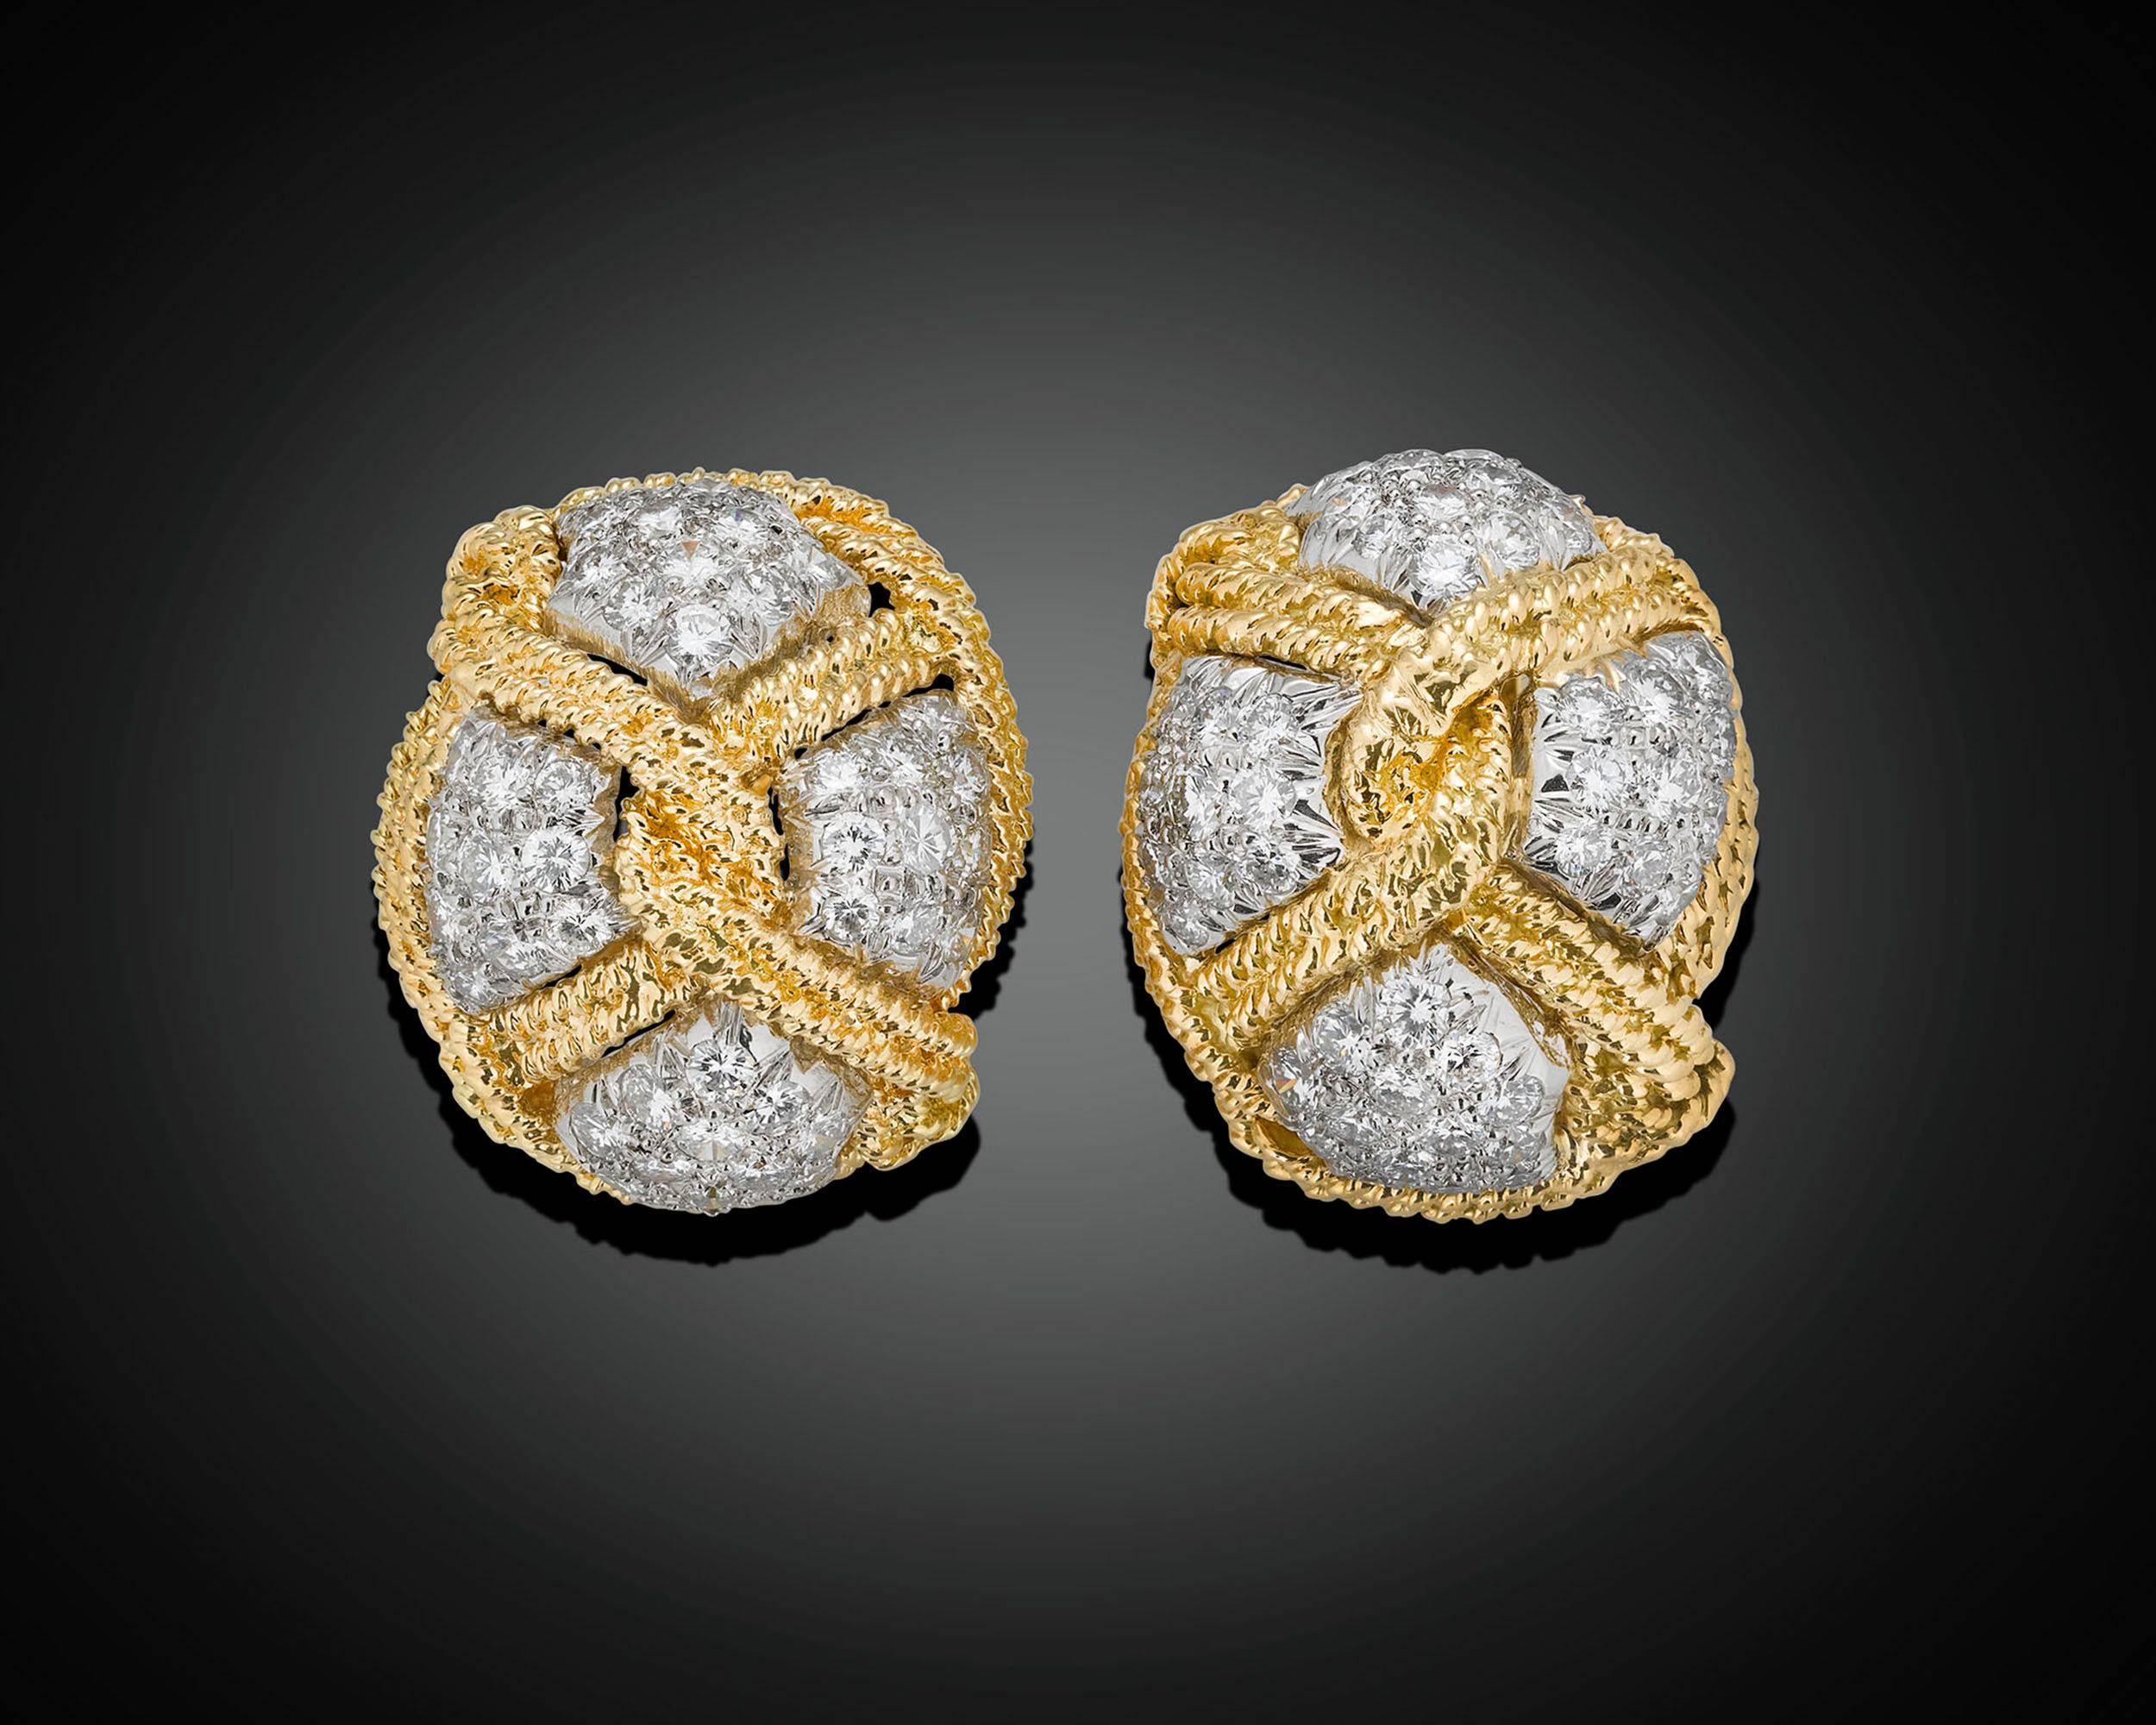 This elegant pair of earrings by David Webb boasts a unique and stylish twisted knot motif crafted of 18k yellow gold and platinum. Approximately 2.88 total carats of glistening white diamonds add exceptional sparkle to the structural design.